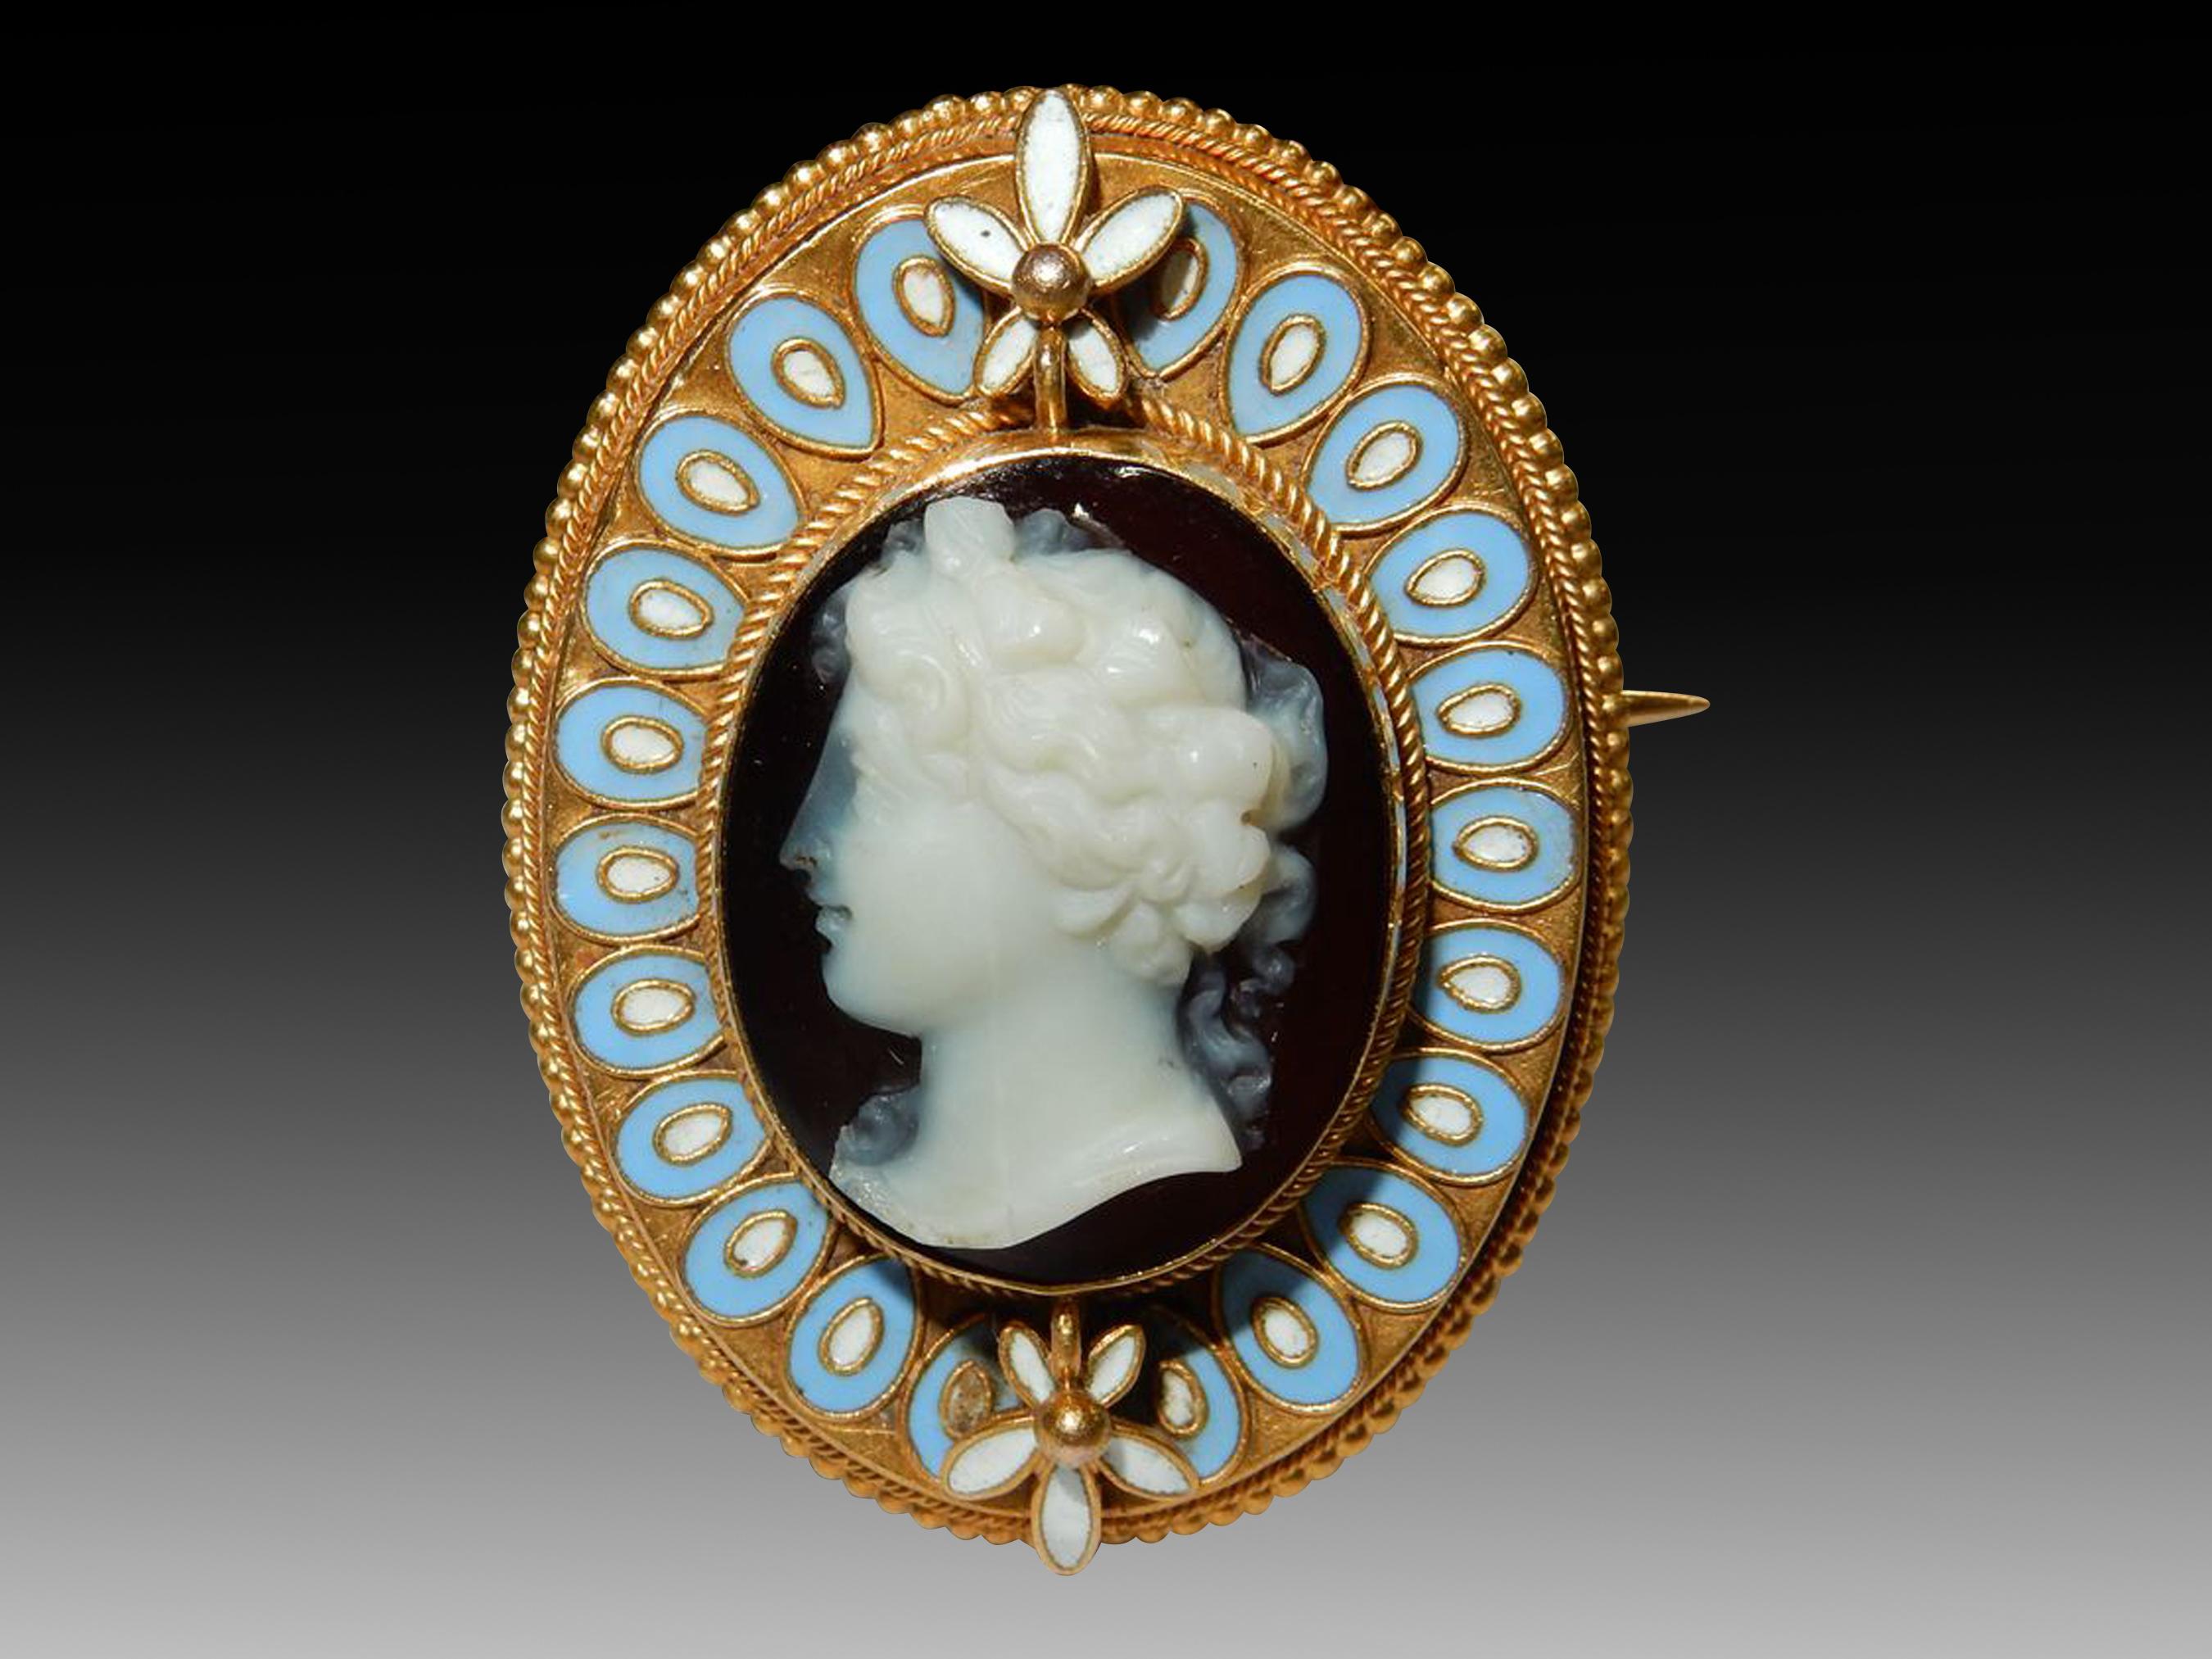 A high-quality gold hardstone cameo (Circa 1860) depicting a classical roman lady, probably a deity or Bacchante. The detail is magnificent, with intricately hand-carved hardstone coupled with fine gold wirework and beading. The blue and white